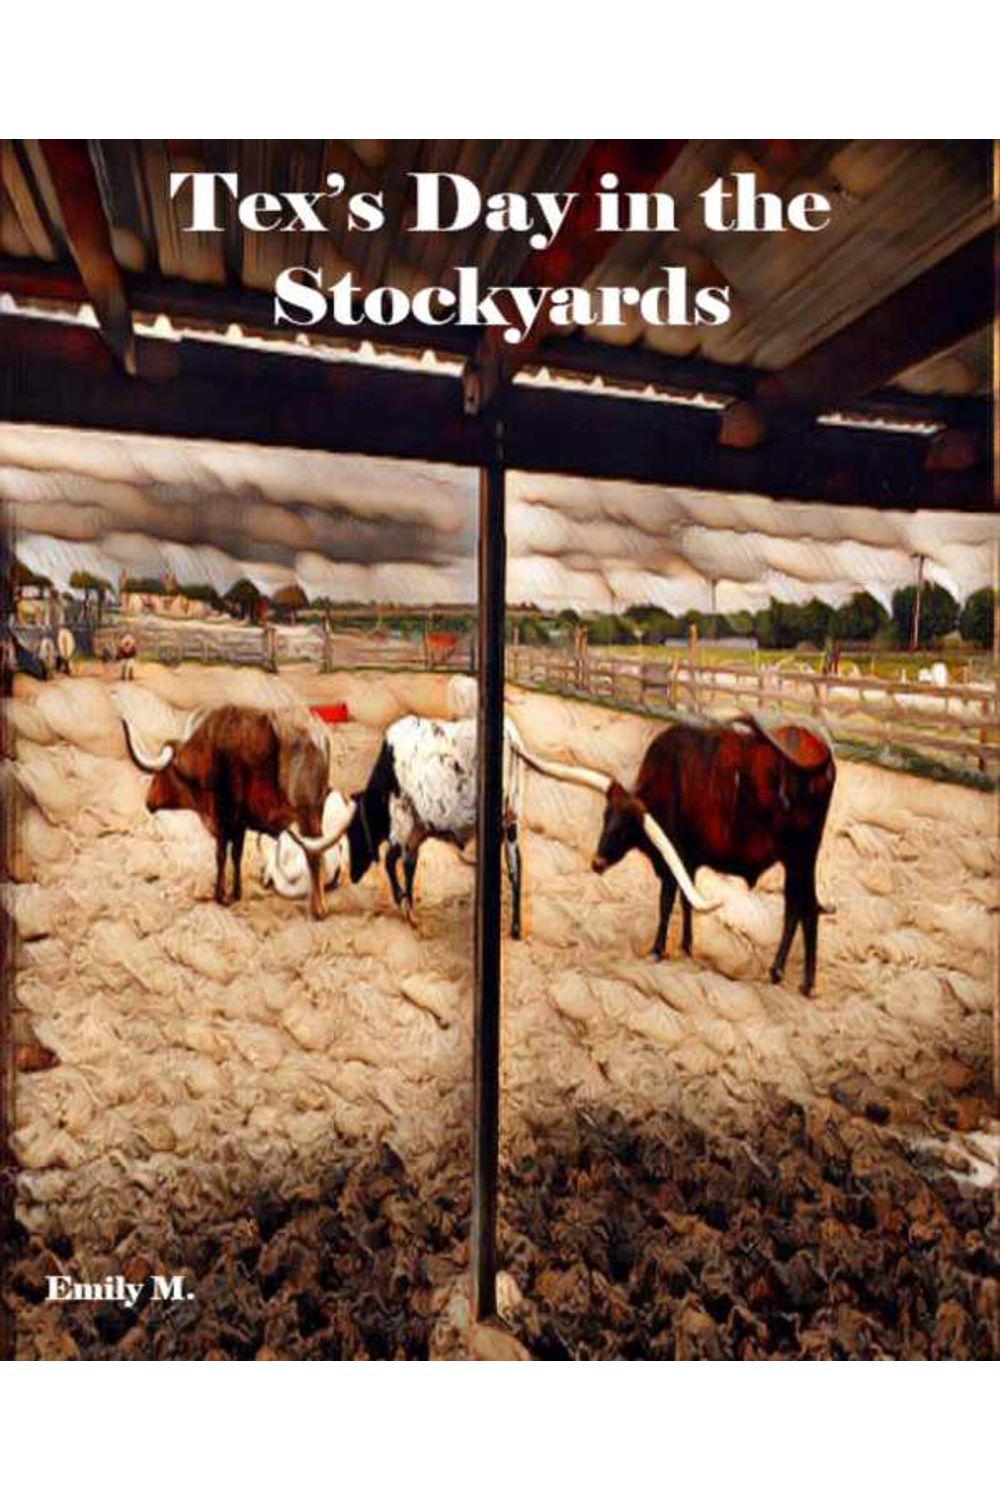 bw-big-tex-amp-friends-texs-day-at-the-stock-yards-bookrix-9783748763147